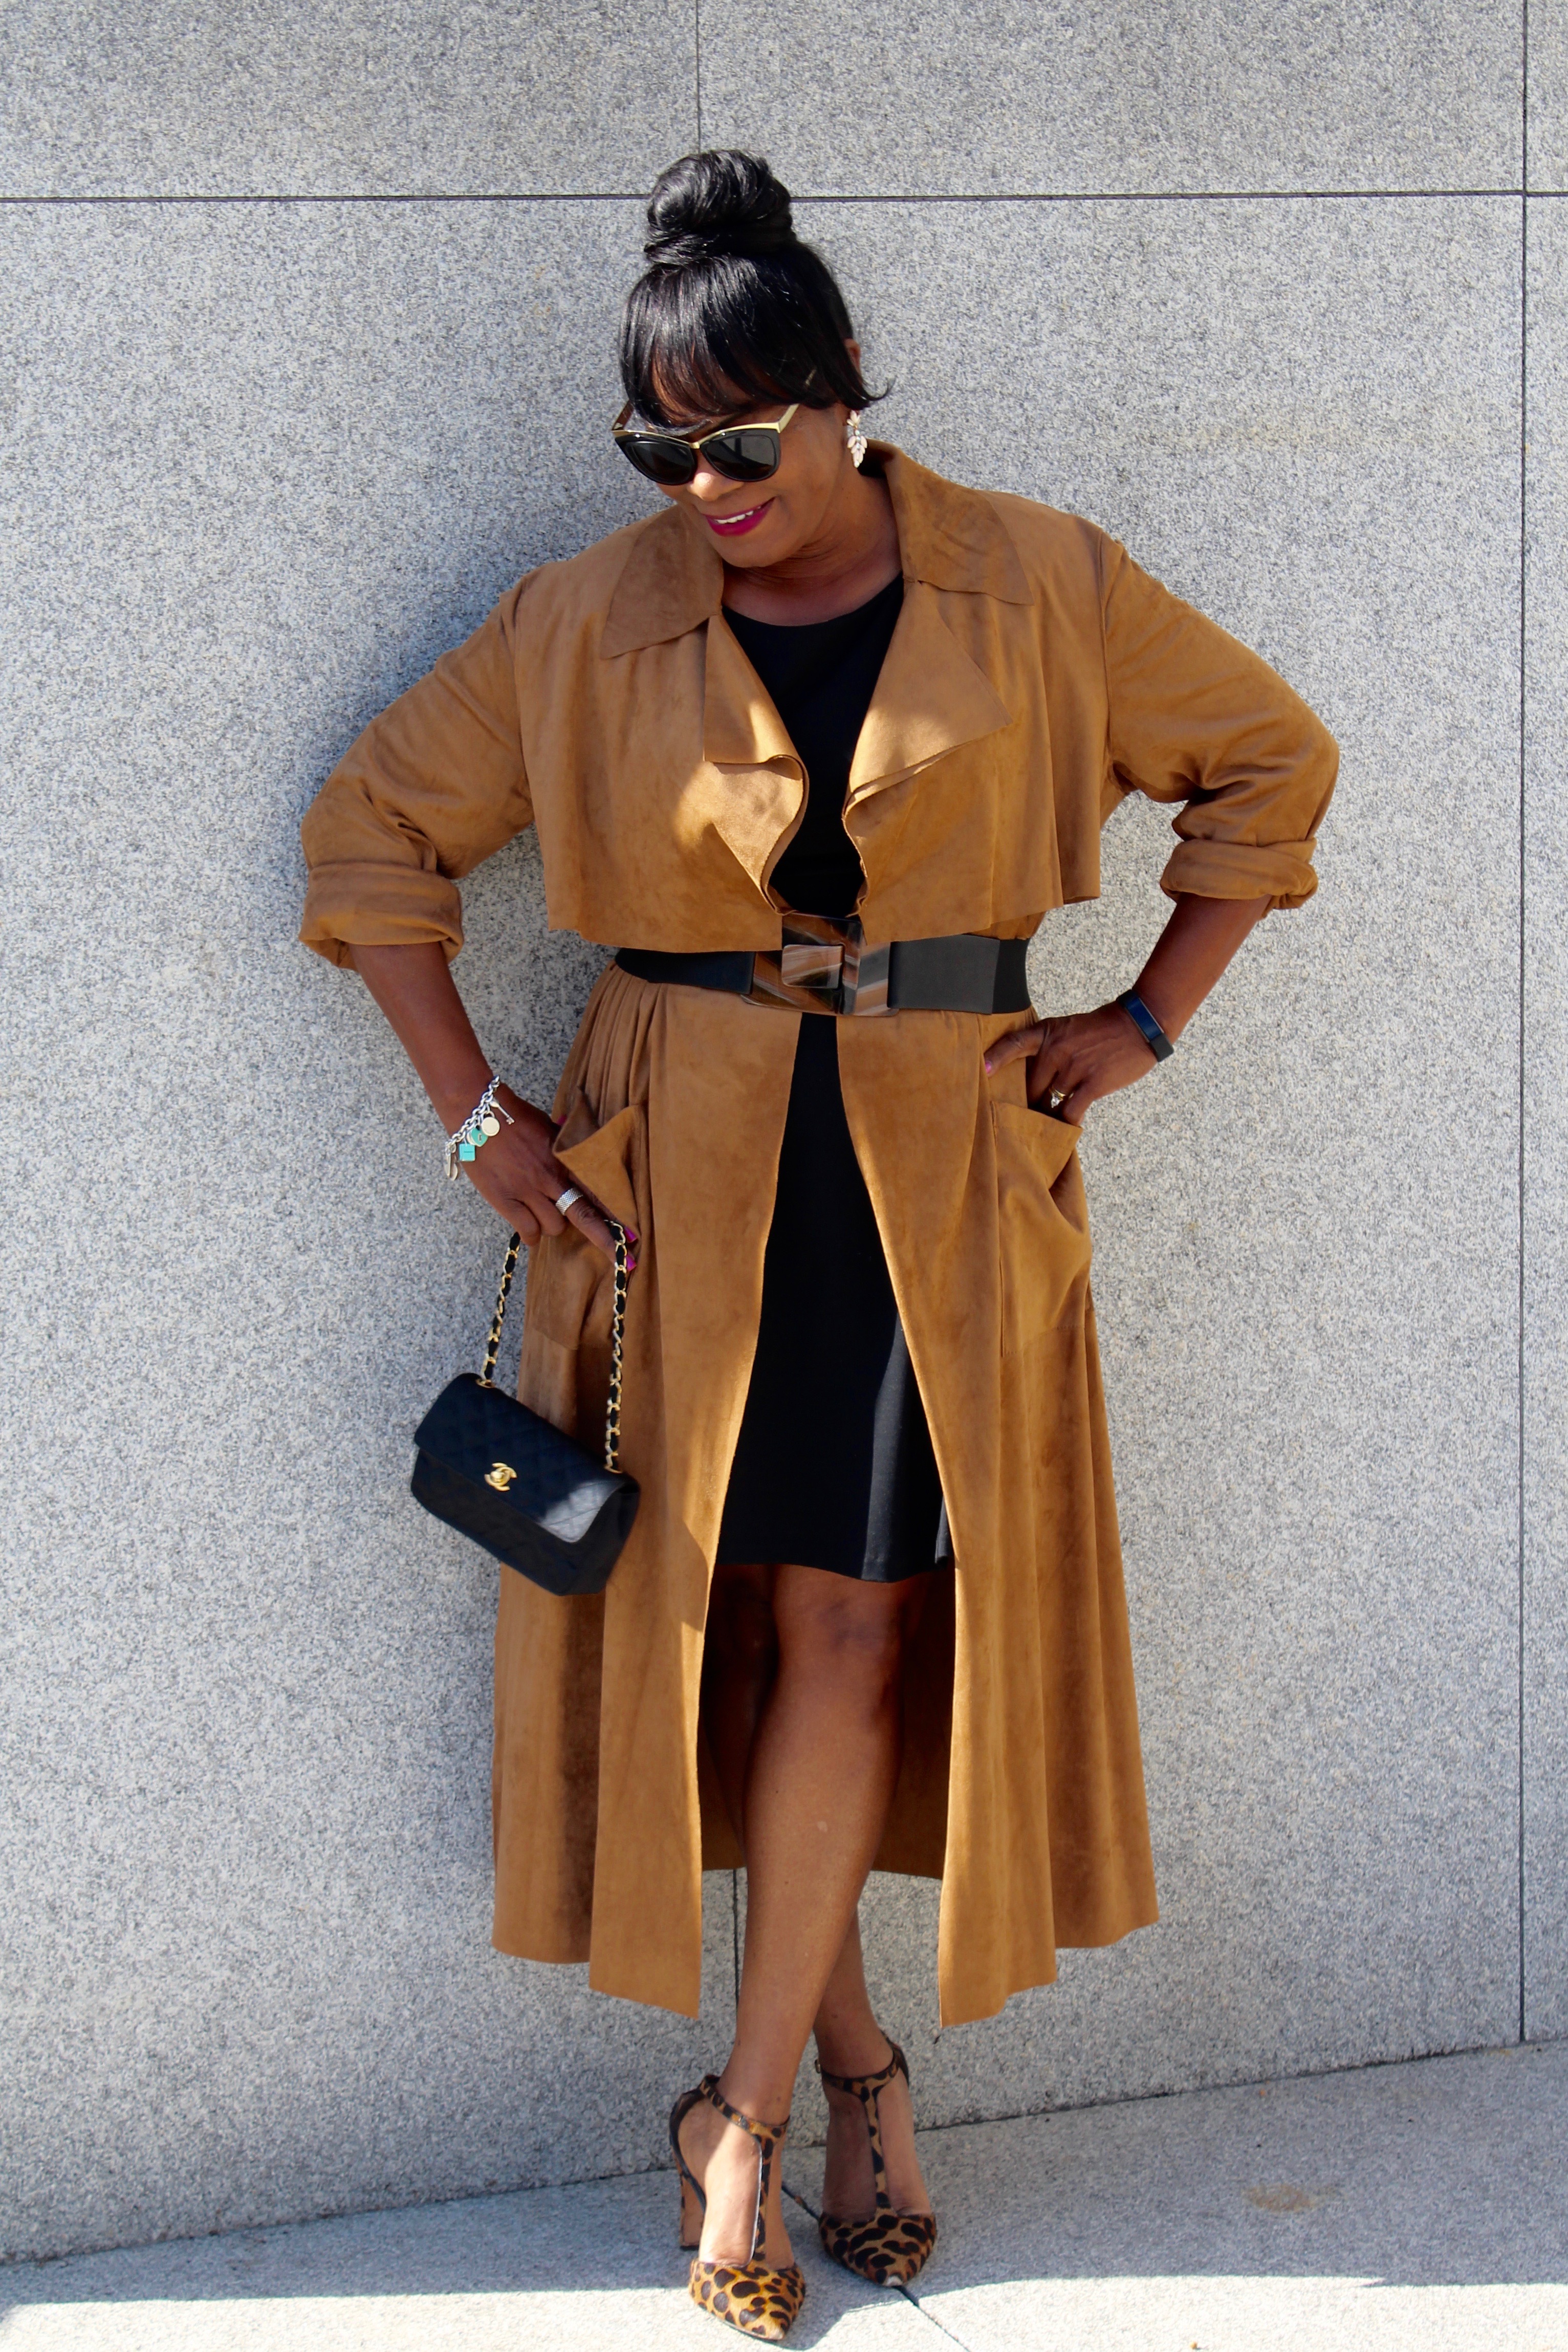 ASOS Suede Trench Belted Over Dress Over Dress; Amazon Review